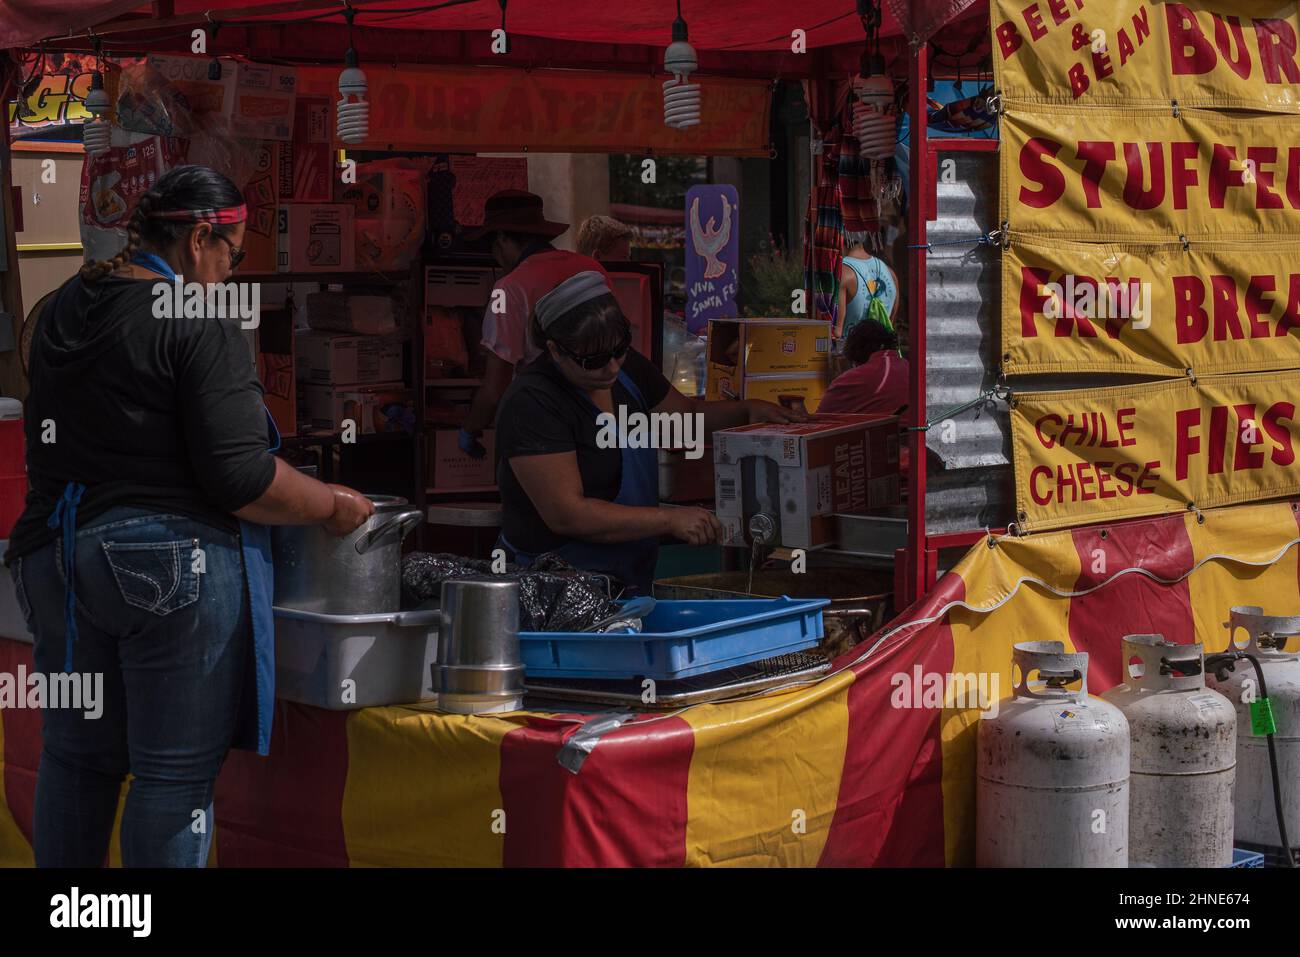 Two women with black hair work in a food booth, one pouring cooking oil for fried foods. A sign advertises fry bread and chile cheese fries. Stock Photo